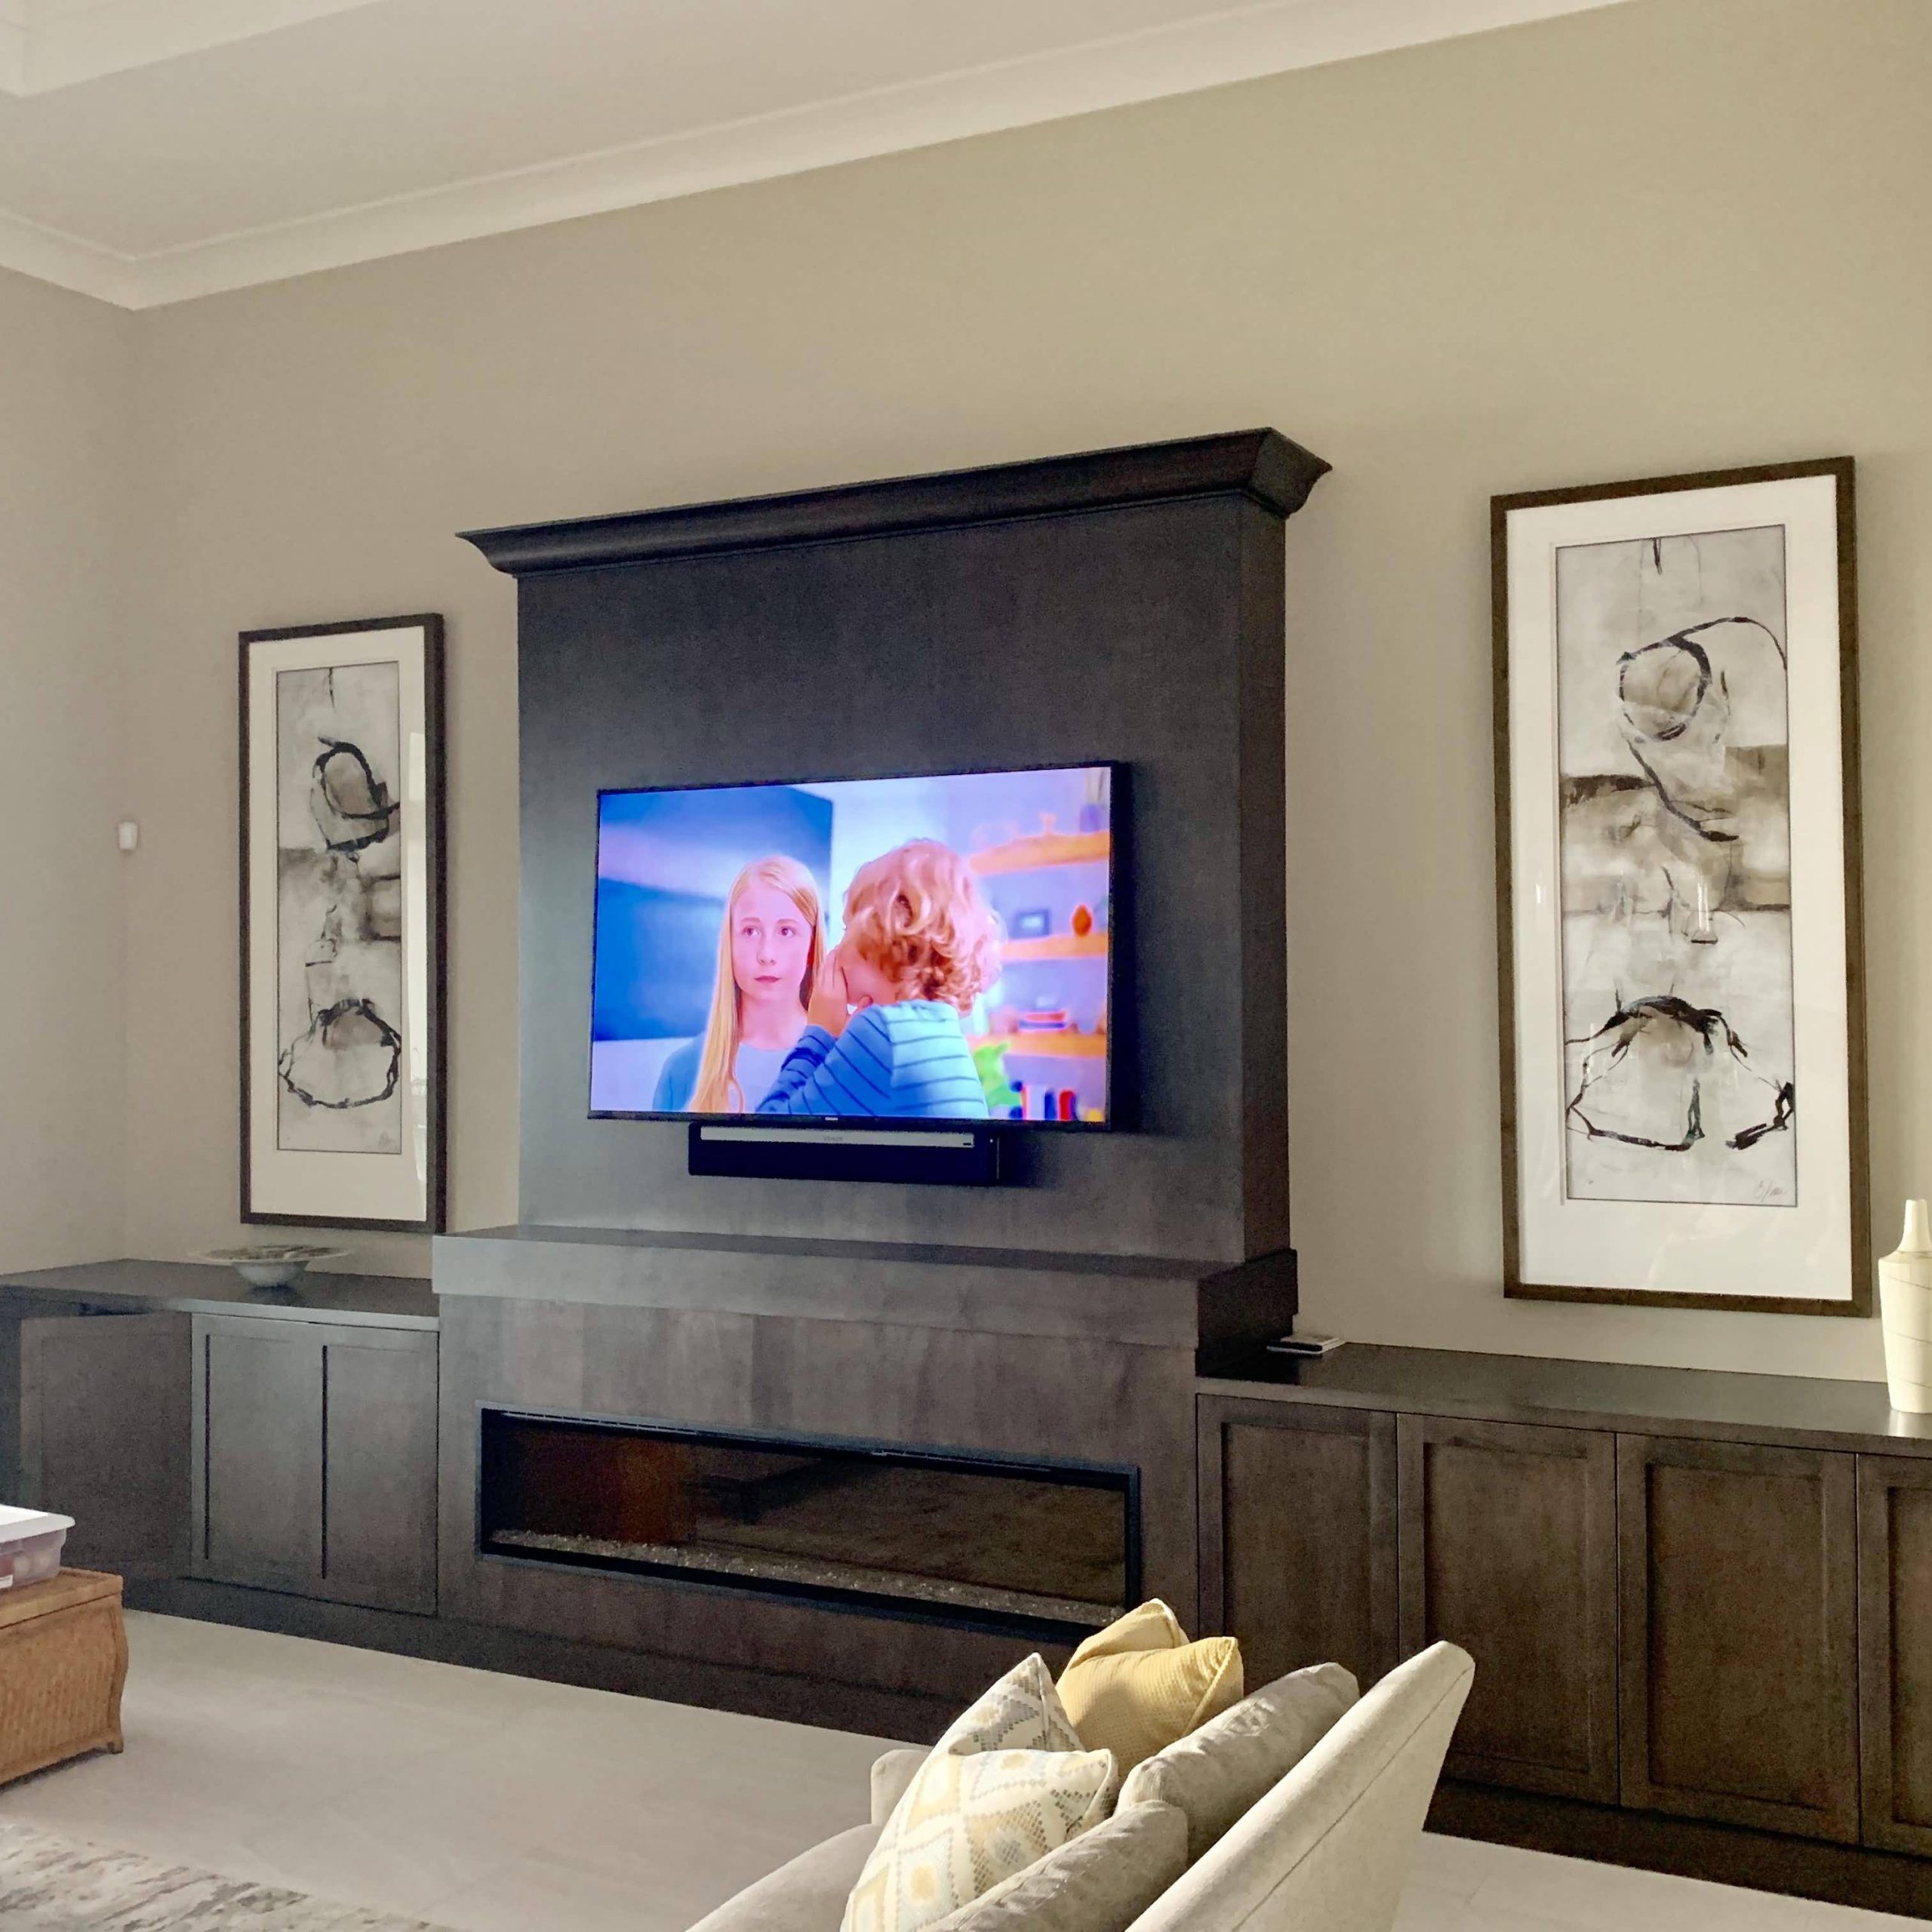 Walnut Large Entertainment Center With Fireplace – Pohl Custom Cabinets Pertaining To Walnut Entertainment Centers (View 6 of 20)